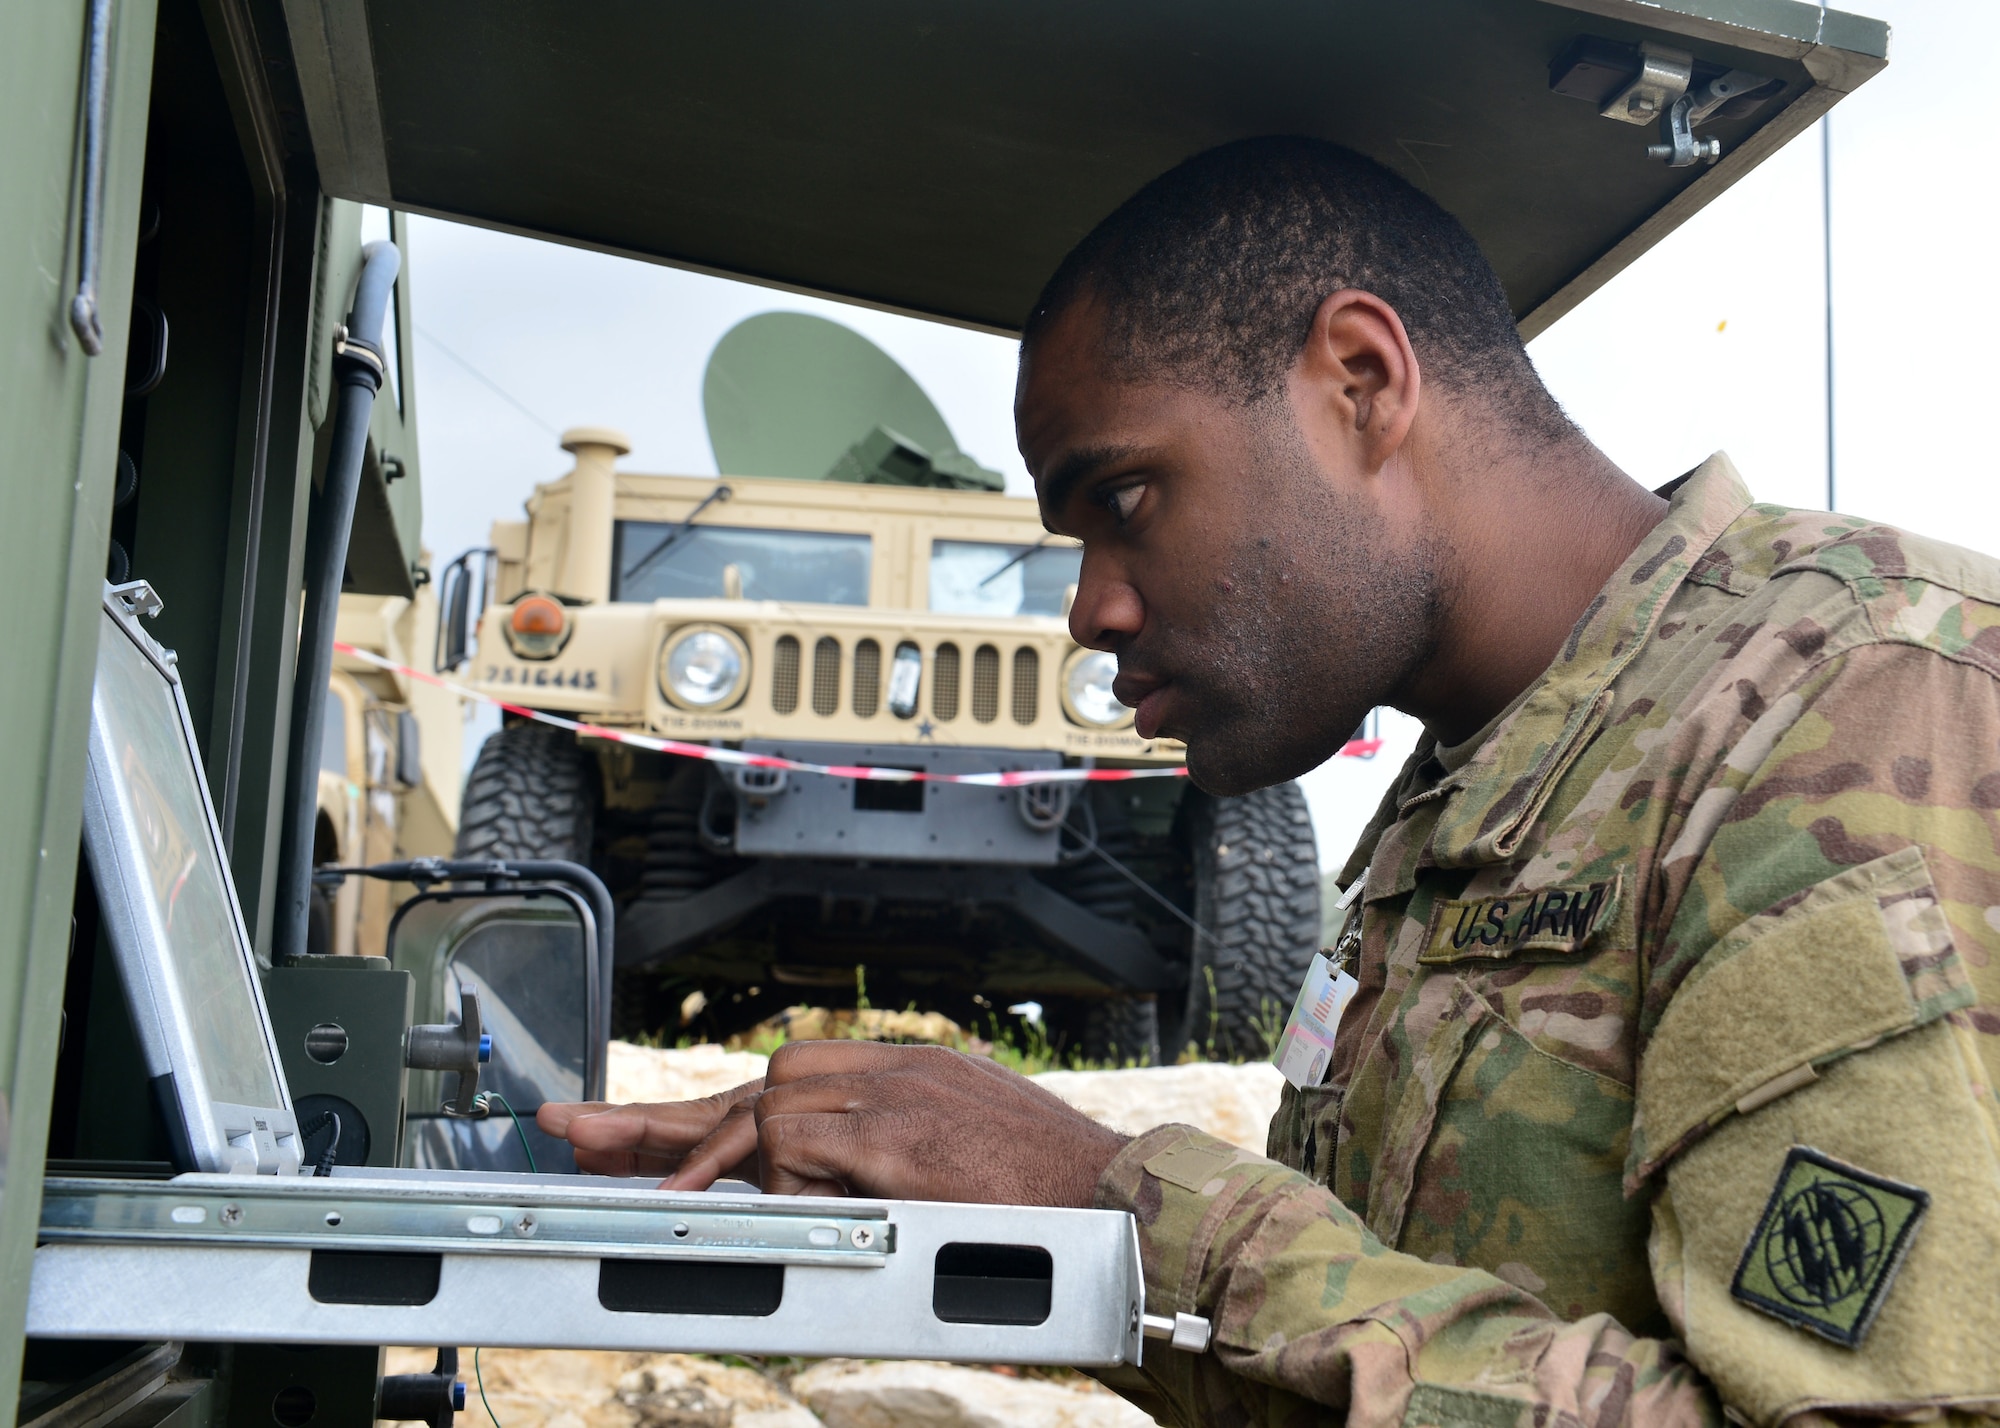 Sgt. Maurice Felder, 44th Expeditionary Signals Battalion Tactical Satellite (TACSAT) team chief, from Grafenwohr, Germany, troubleshoots the satellite connection during exercise Juniper Cobra 16 in Israel, Feb. 22, 2016. Juniper Cobra uses ballistic missile defense computer simulations to train U.S. and Israeli service members while reinforcing a strong military relationship. For the first time, Airmen from the 1st Combat Communications Squadron, 52nd CBCS and soldiers from the 44th Expeditionary Signals Battalion work together to support U.S. European Command. (U.S. Air Force photo by Staff Sgt. Stephanie Longoria/Released)